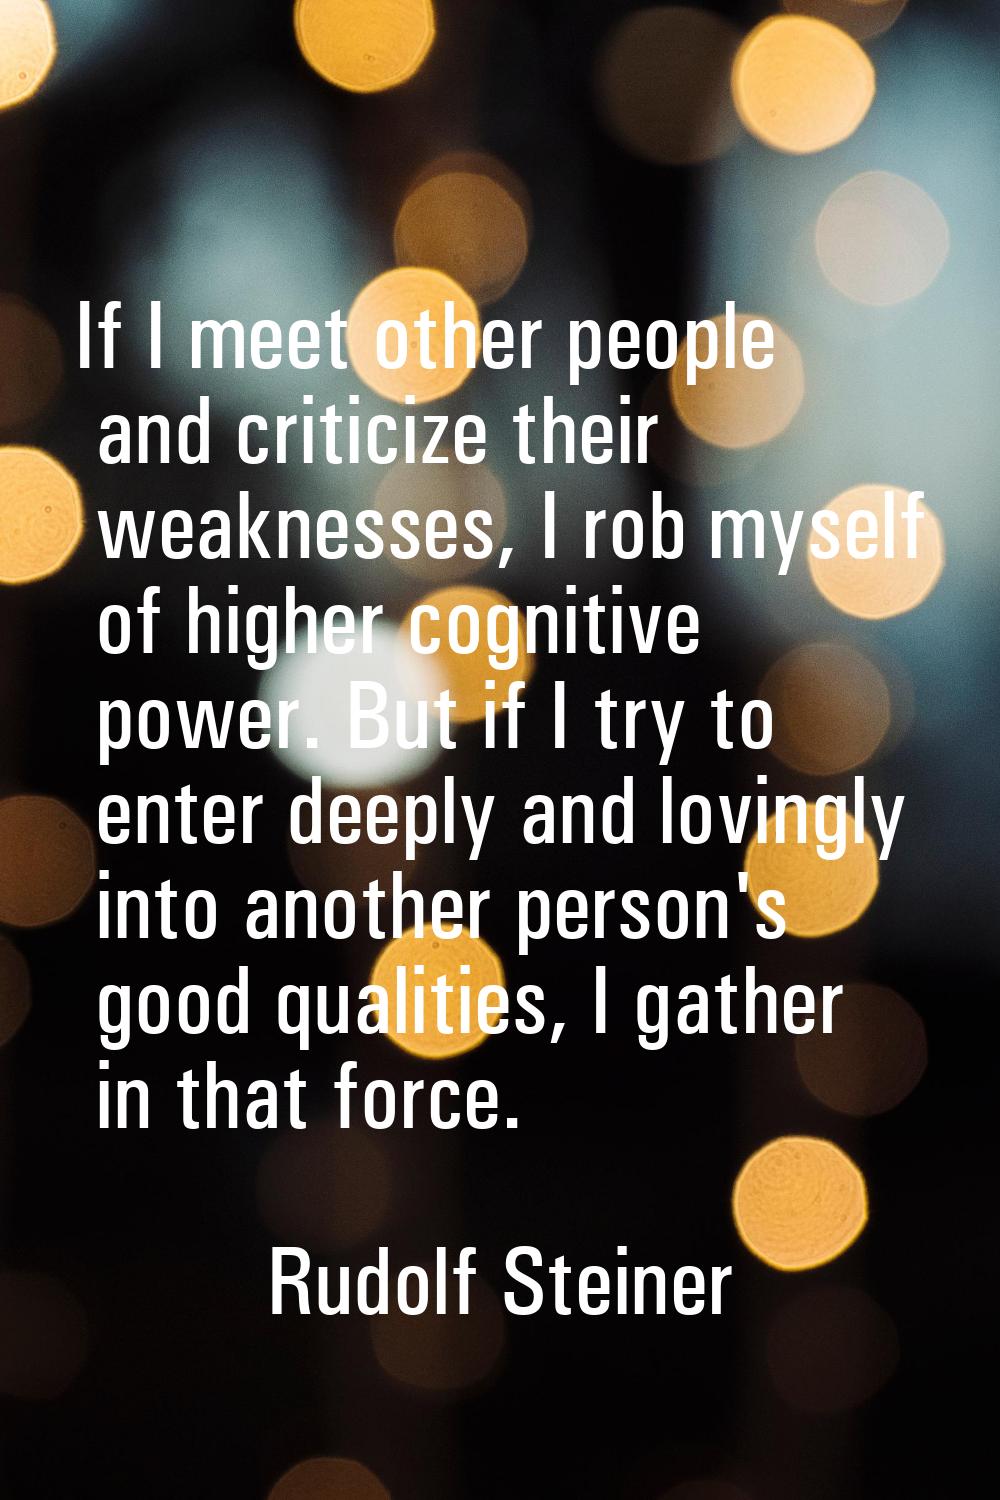 If I meet other people and criticize their weaknesses, I rob myself of higher cognitive power. But 